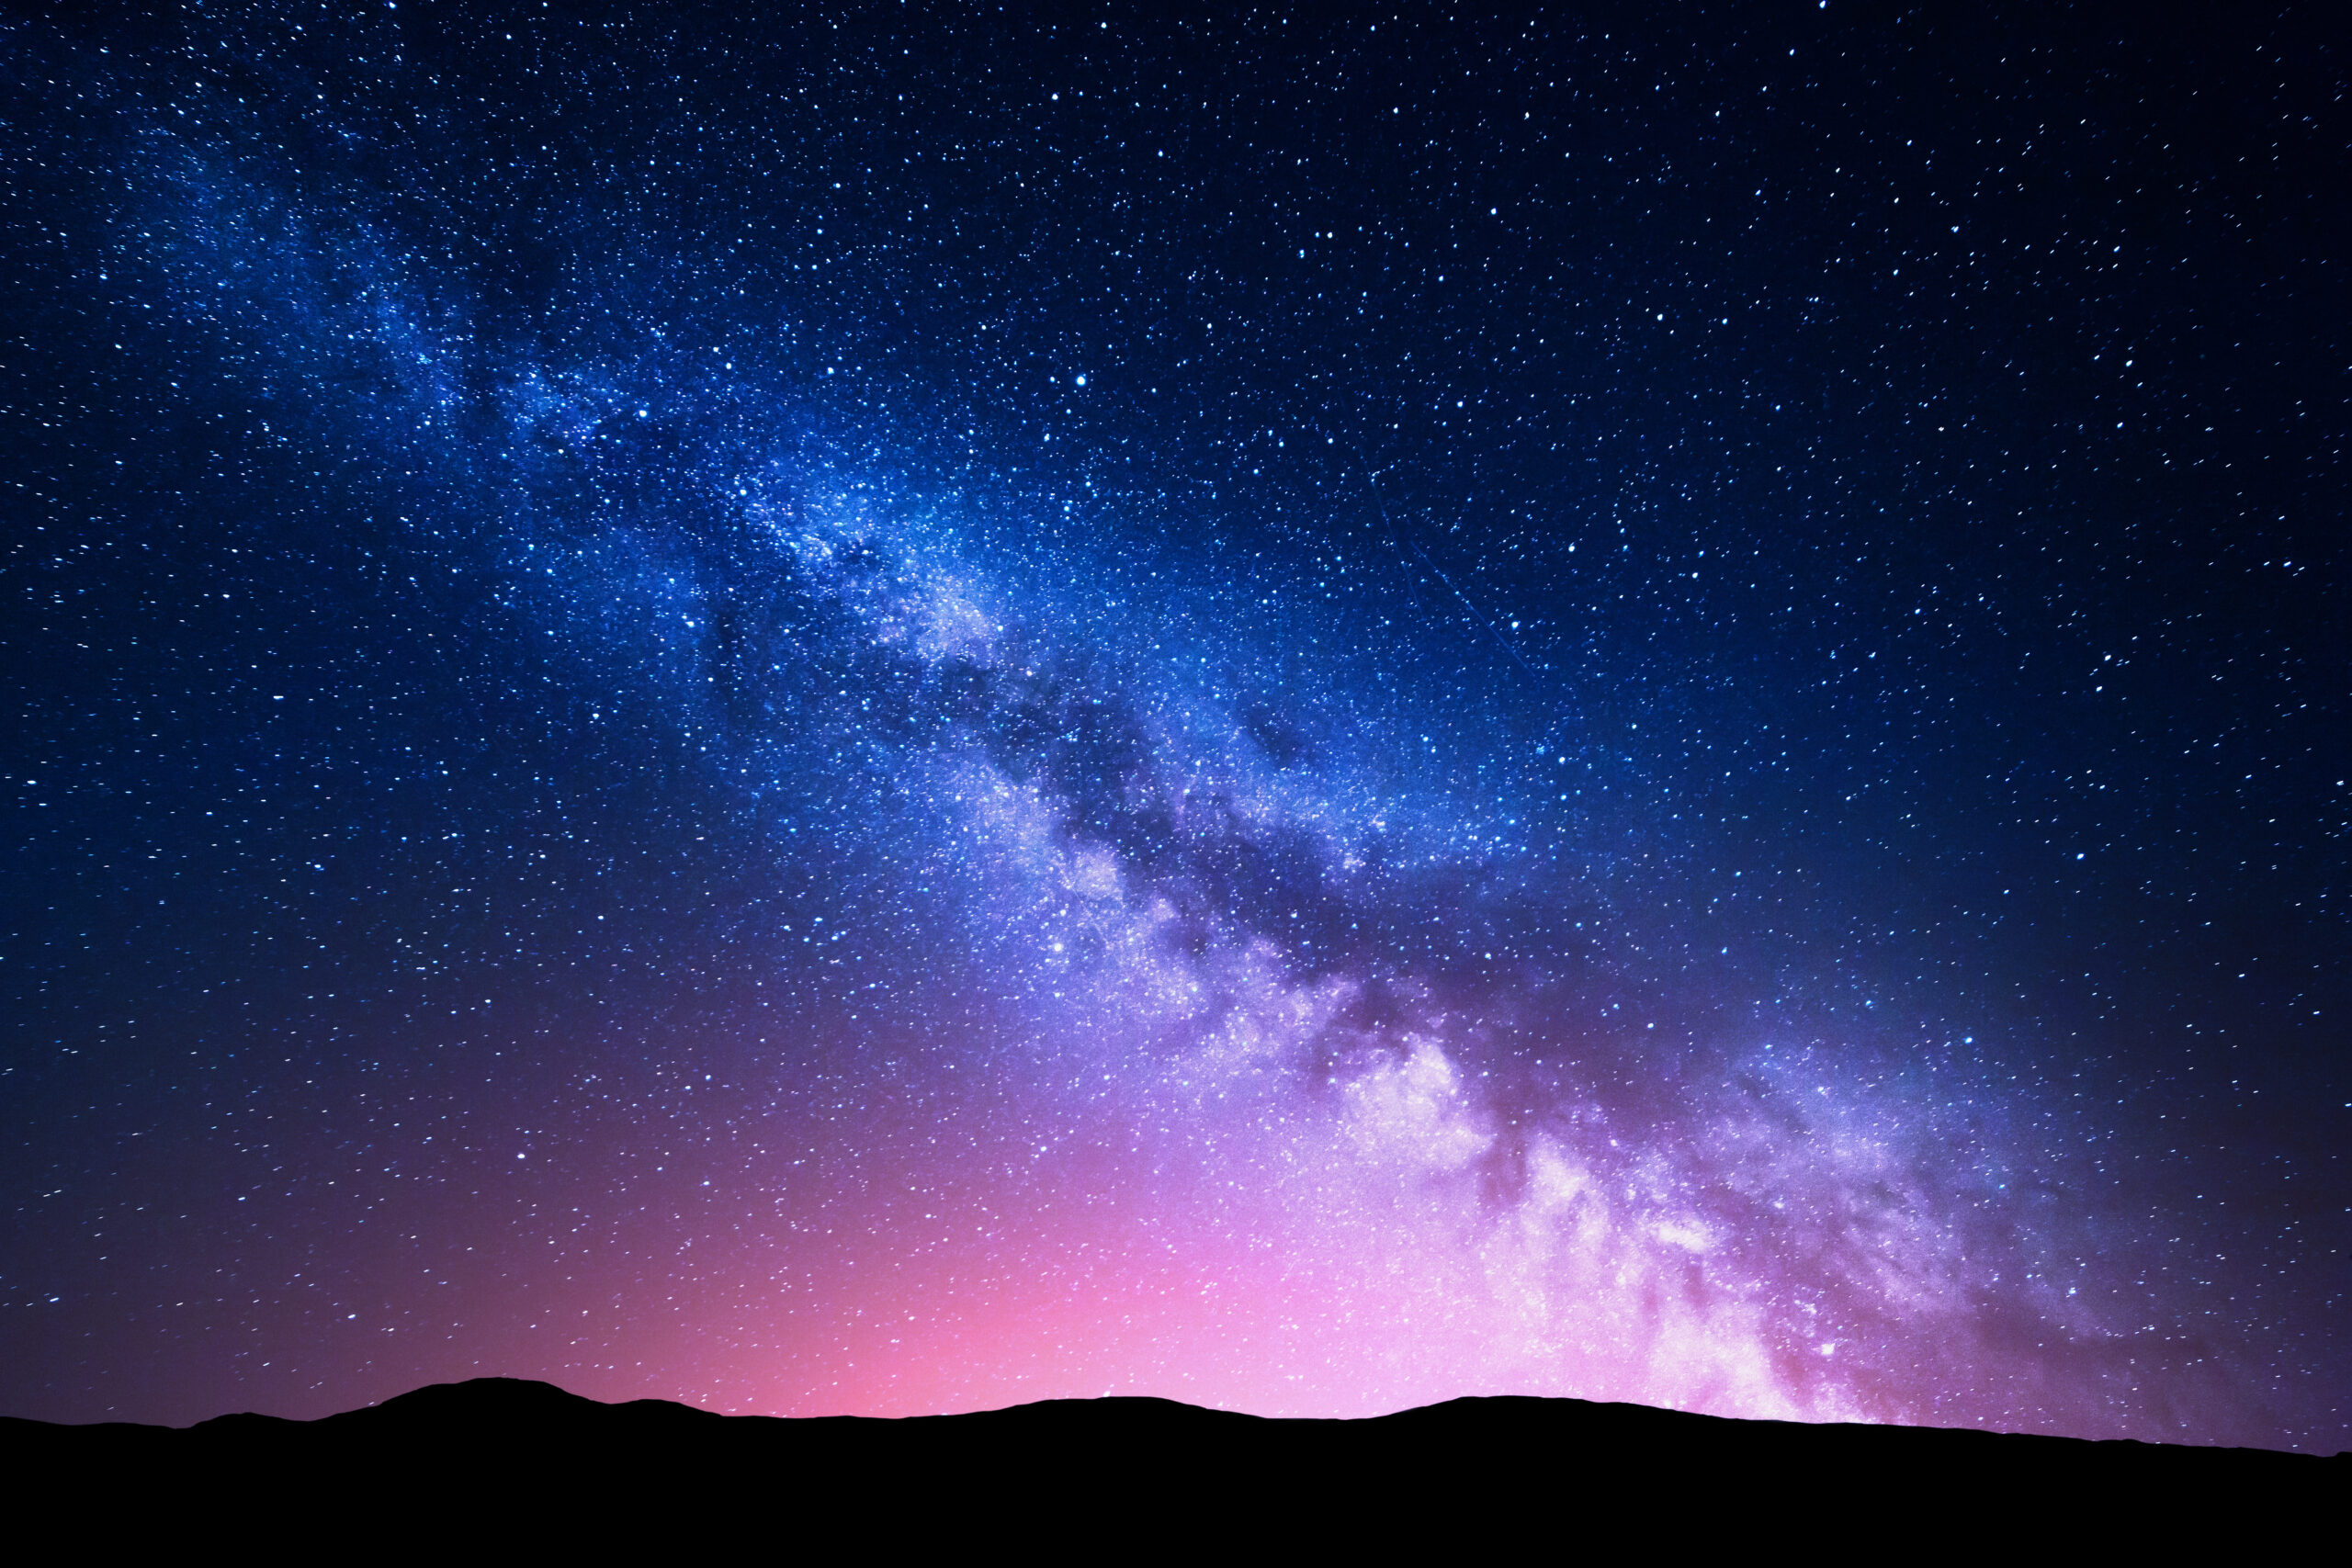 crystal clear view of the Milky Way with glowing magenta on the horizon